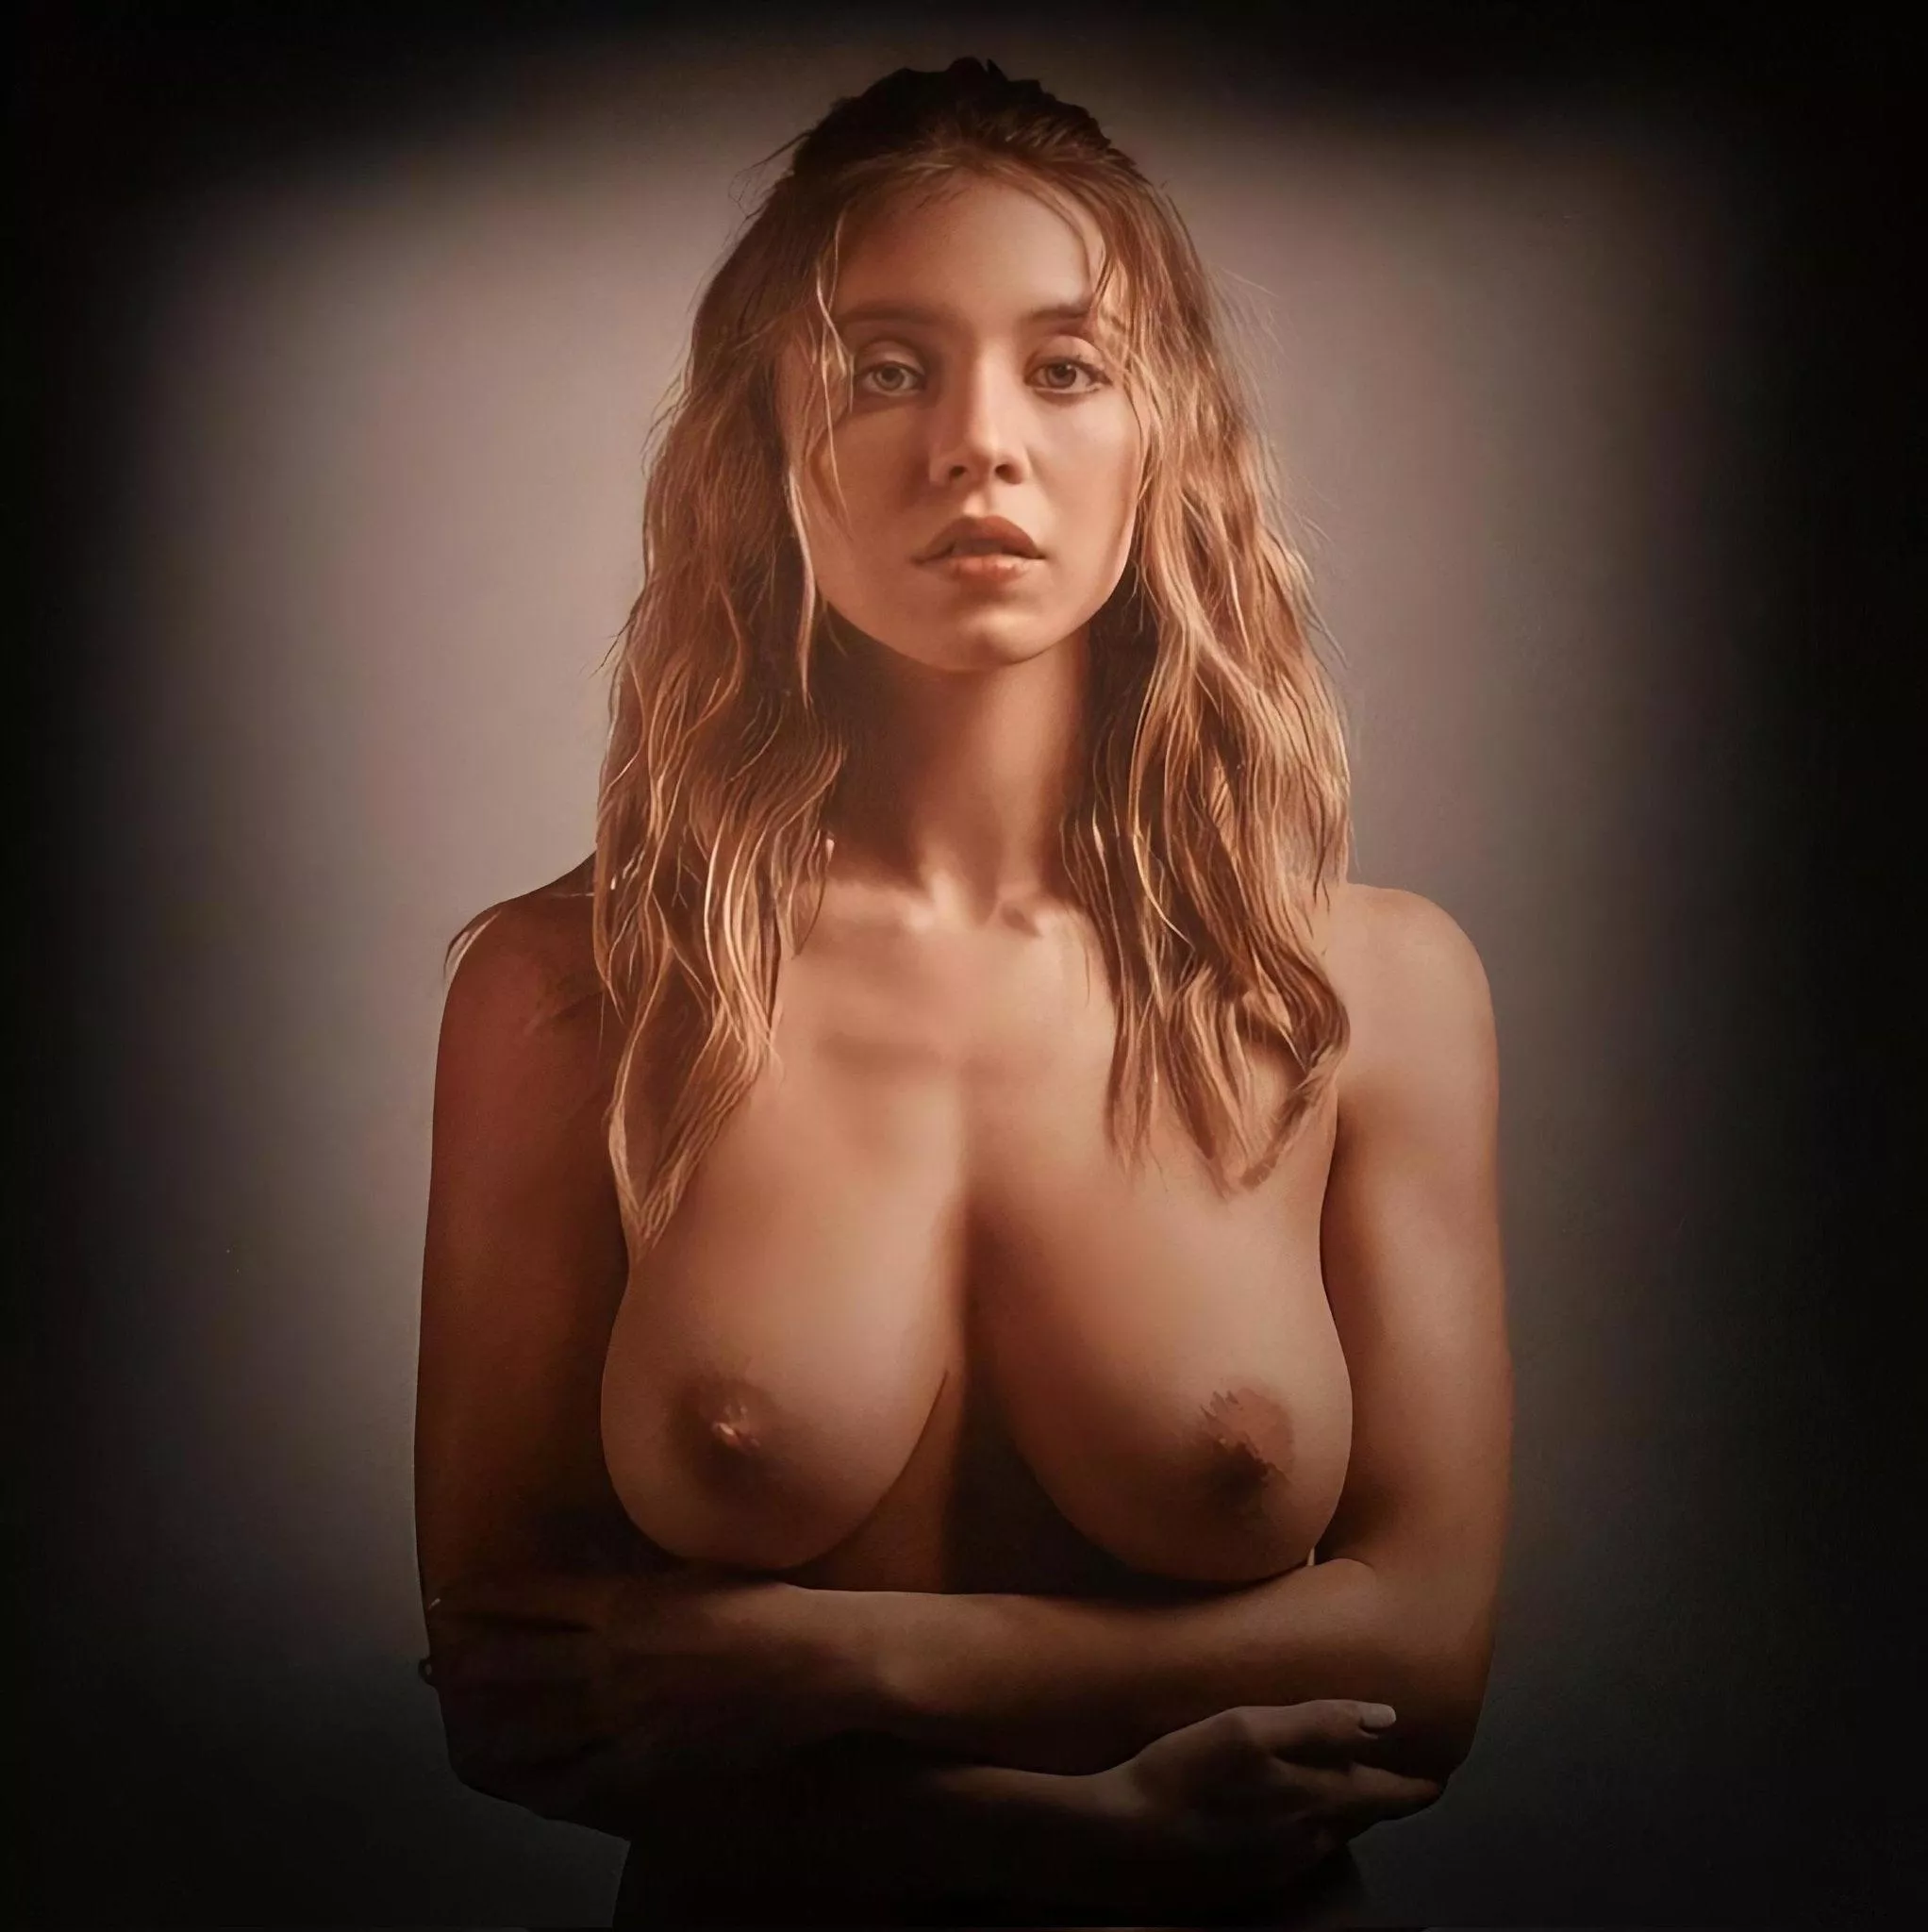 Sydney Sweeney Artistic Nude From The Voyeurs Nudes By Negative Video8419